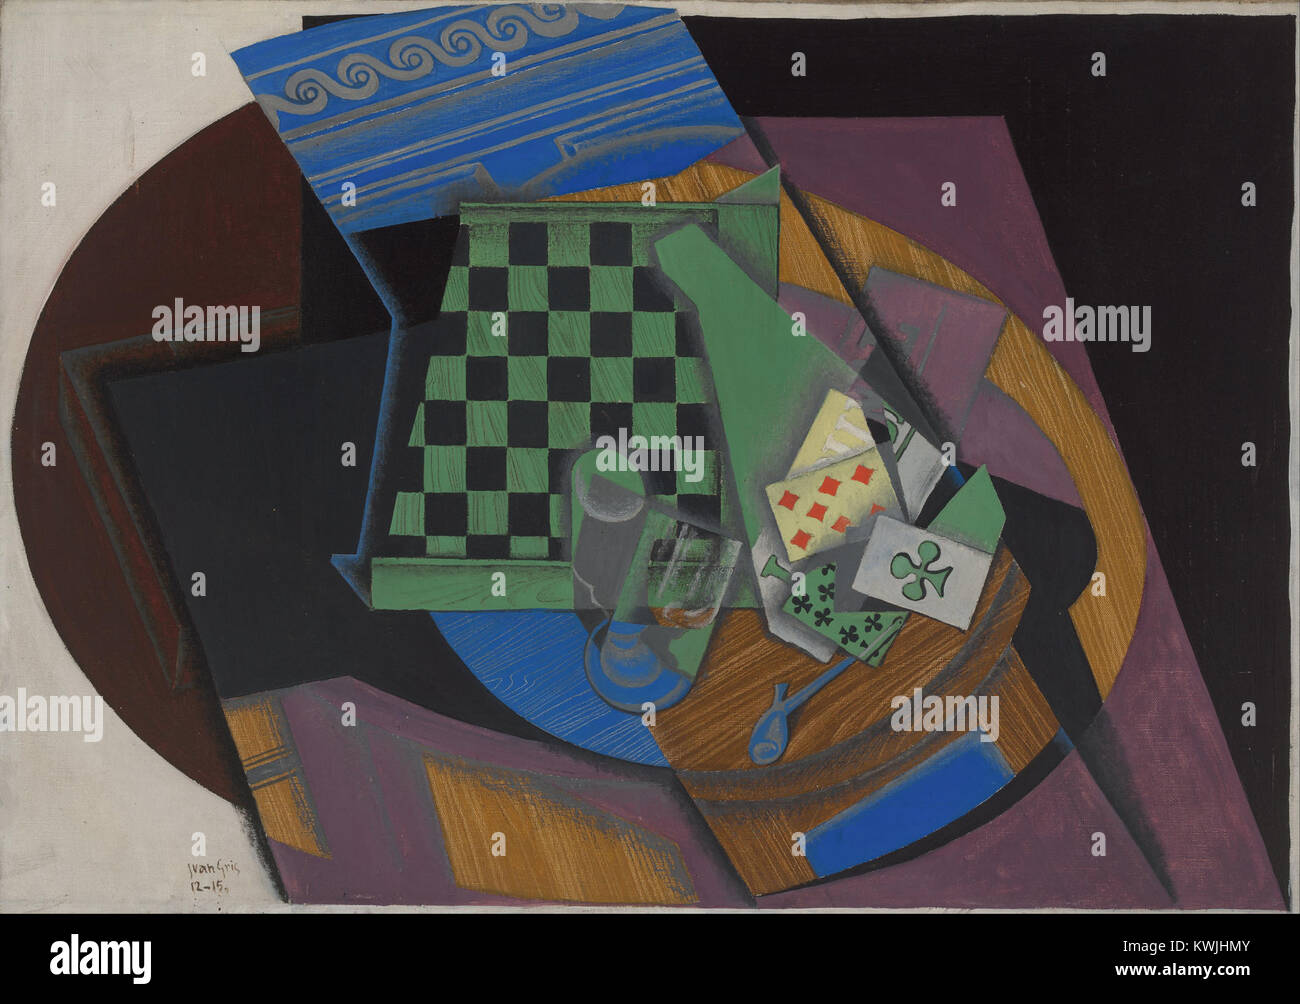 Juan Gris - Damier et cartes à jouer (Checkerboard and playing cards) - Google Art Project Stock Photo